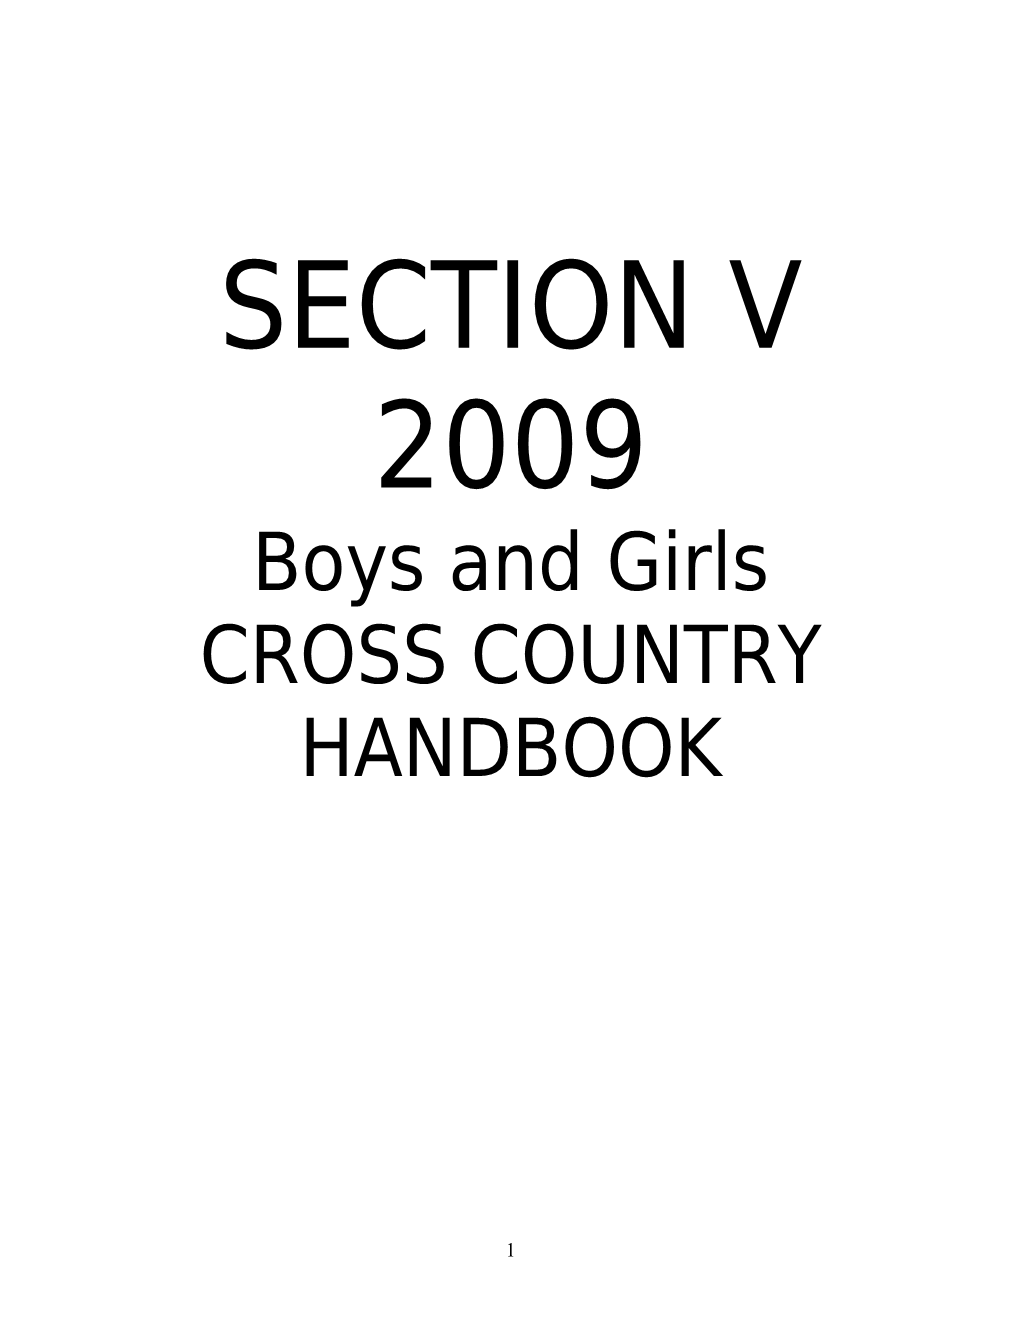 Section V Cross Country